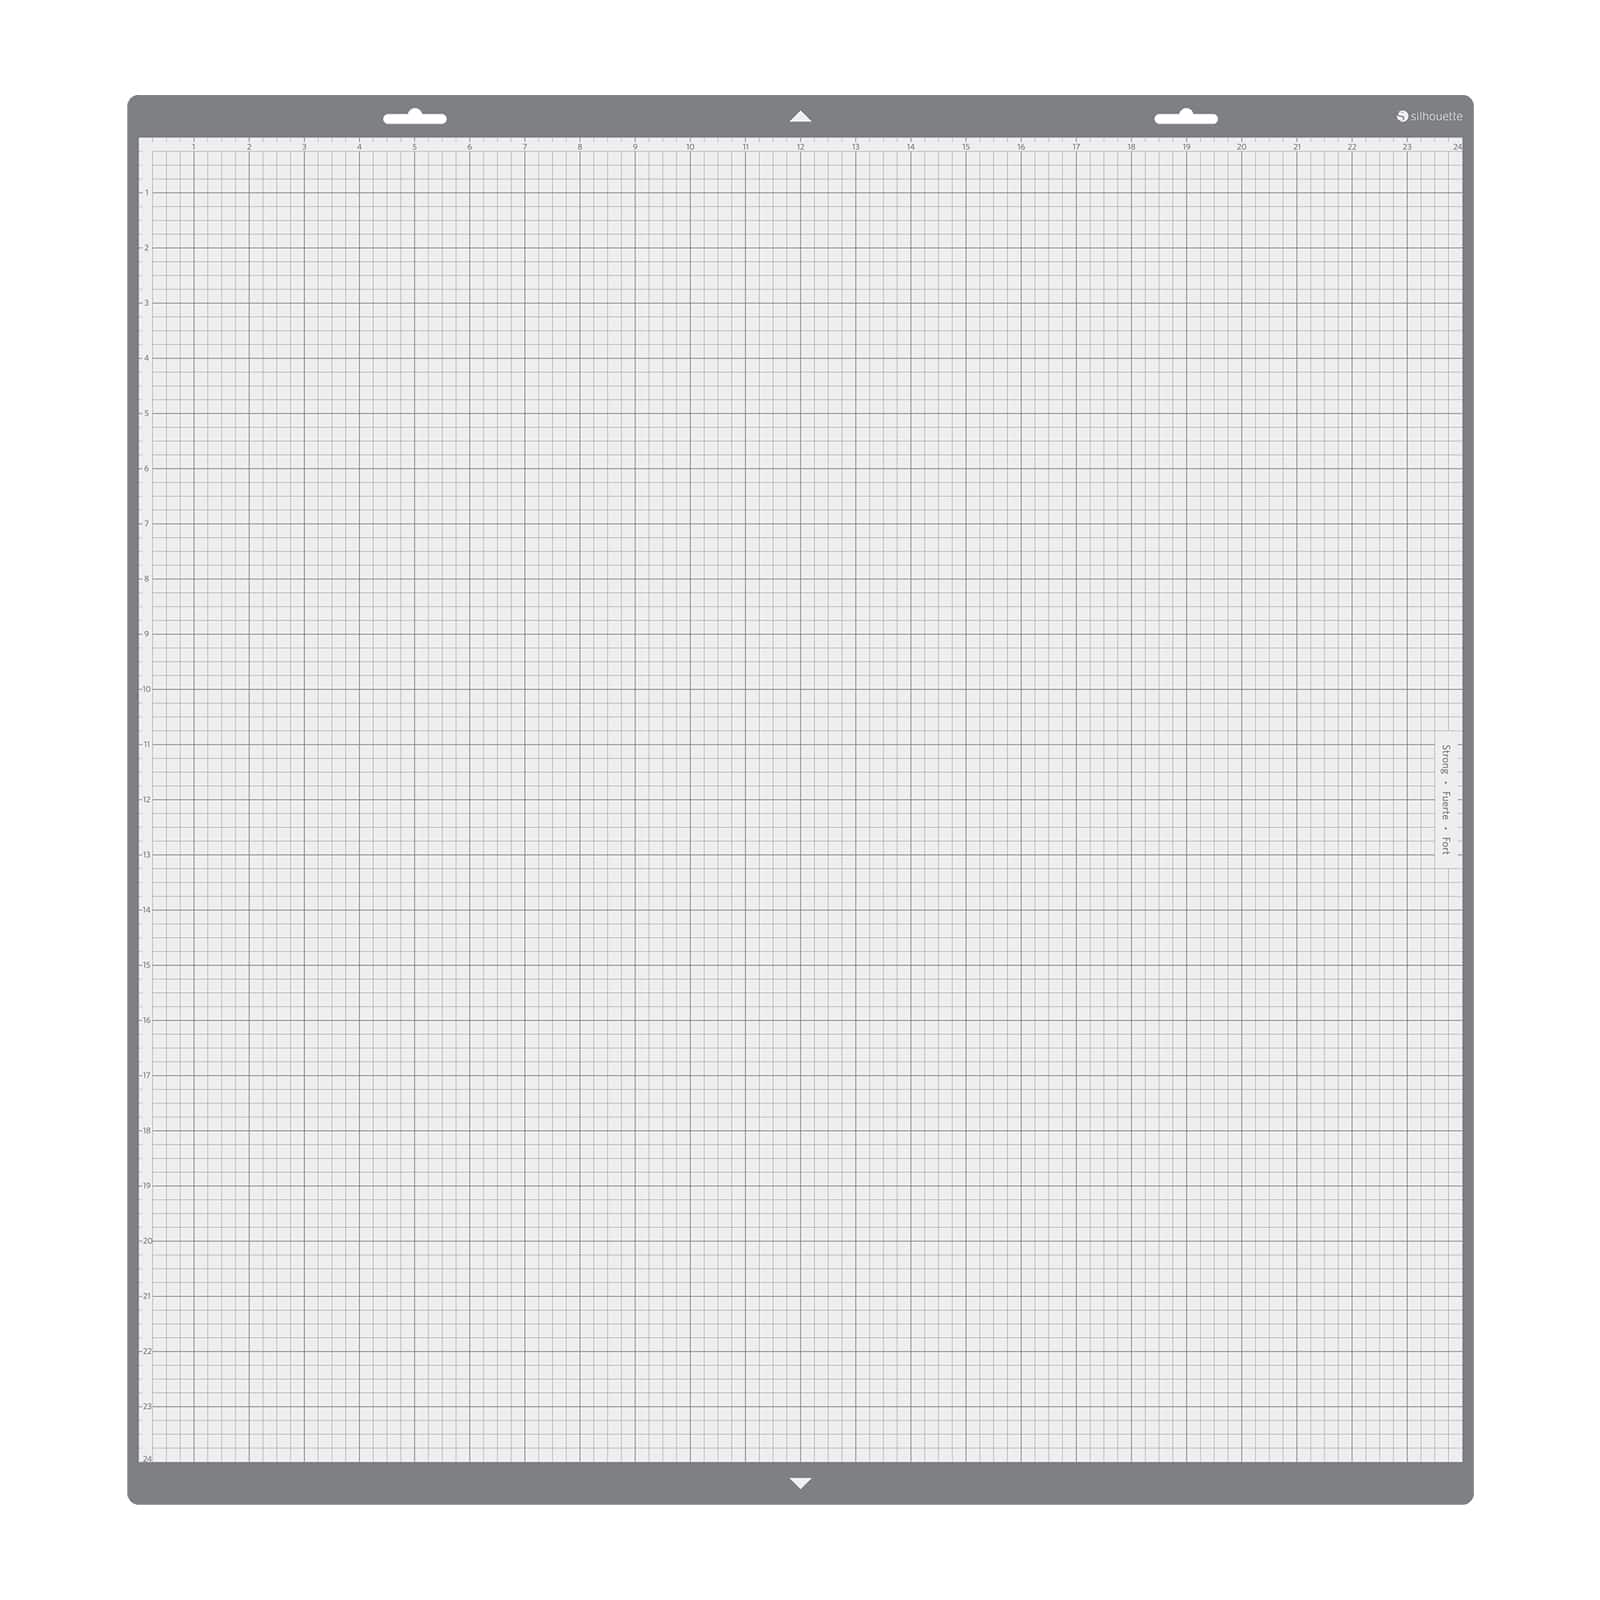 Silhouette Cameo&#xAE; Pro Strong Tack Cutting Mat